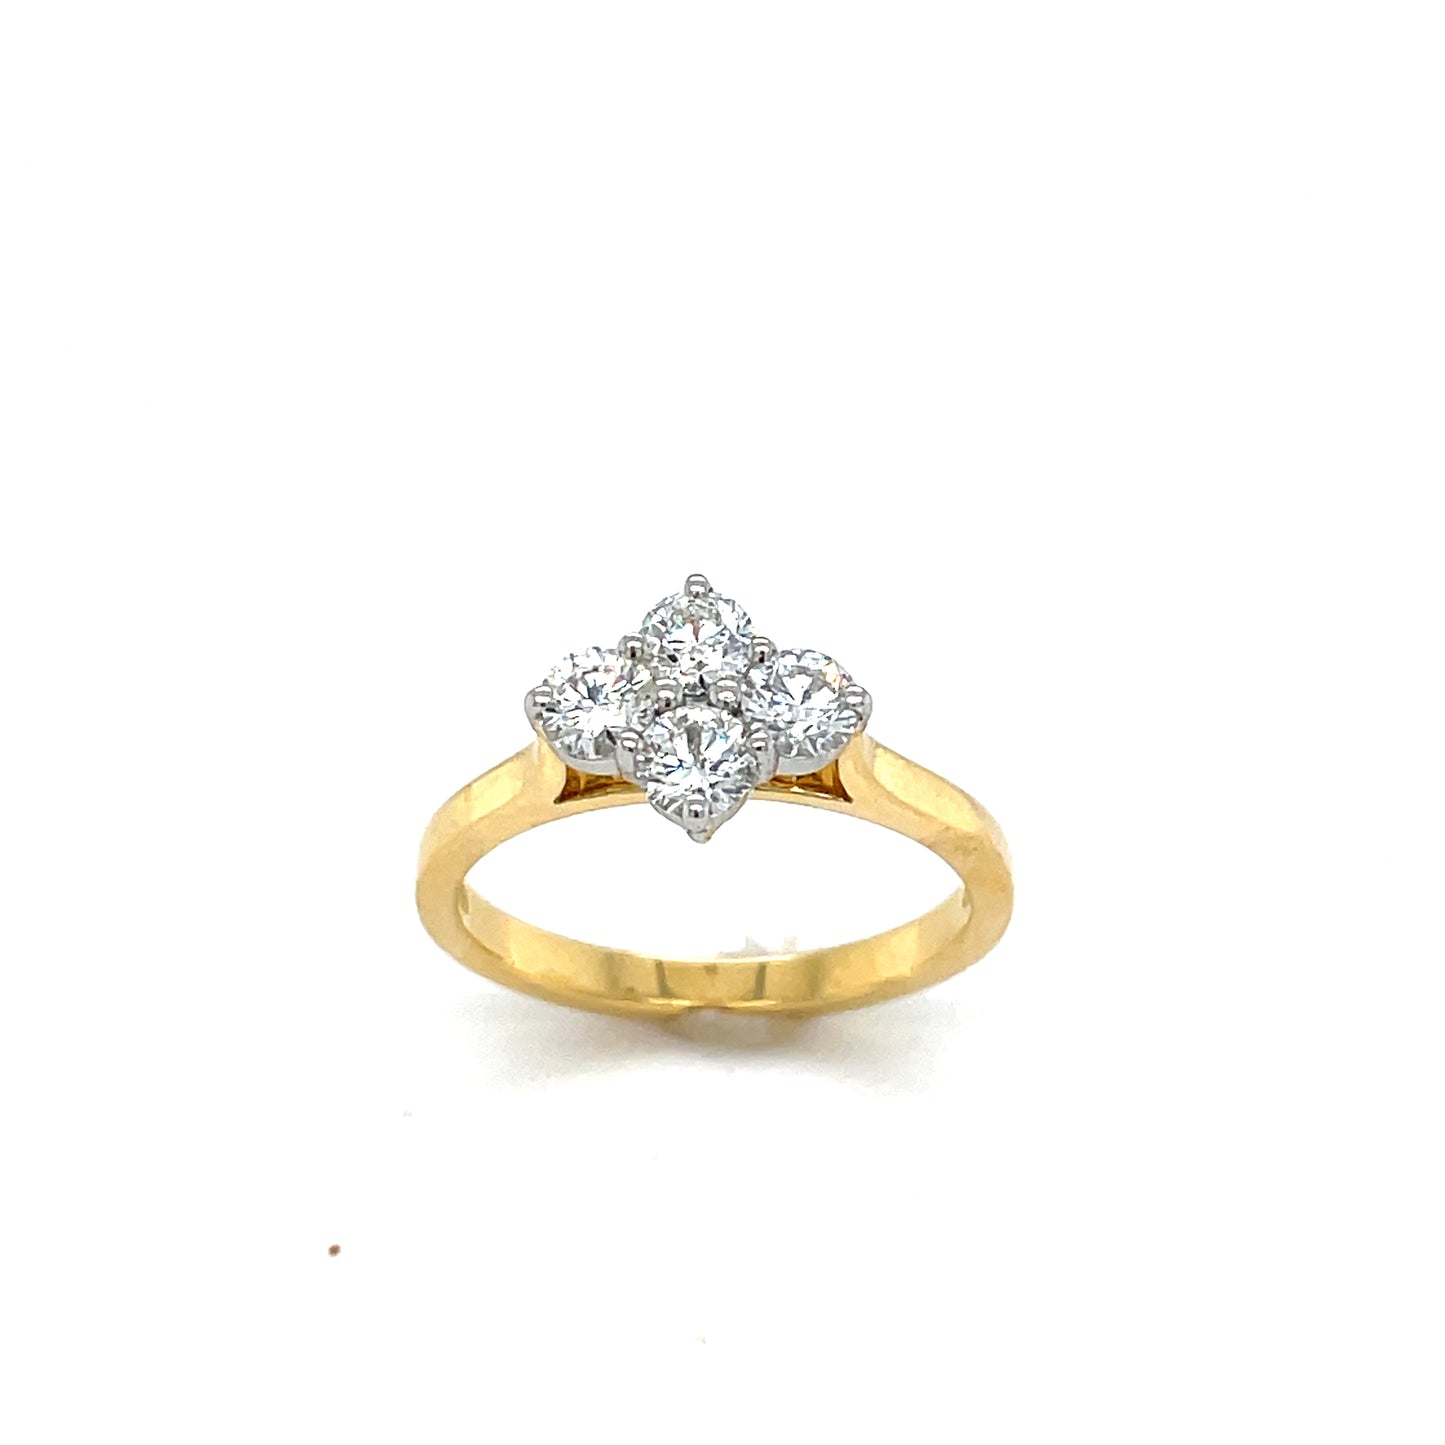 18CT RING 4 STN RD BRILL DIA .77CT